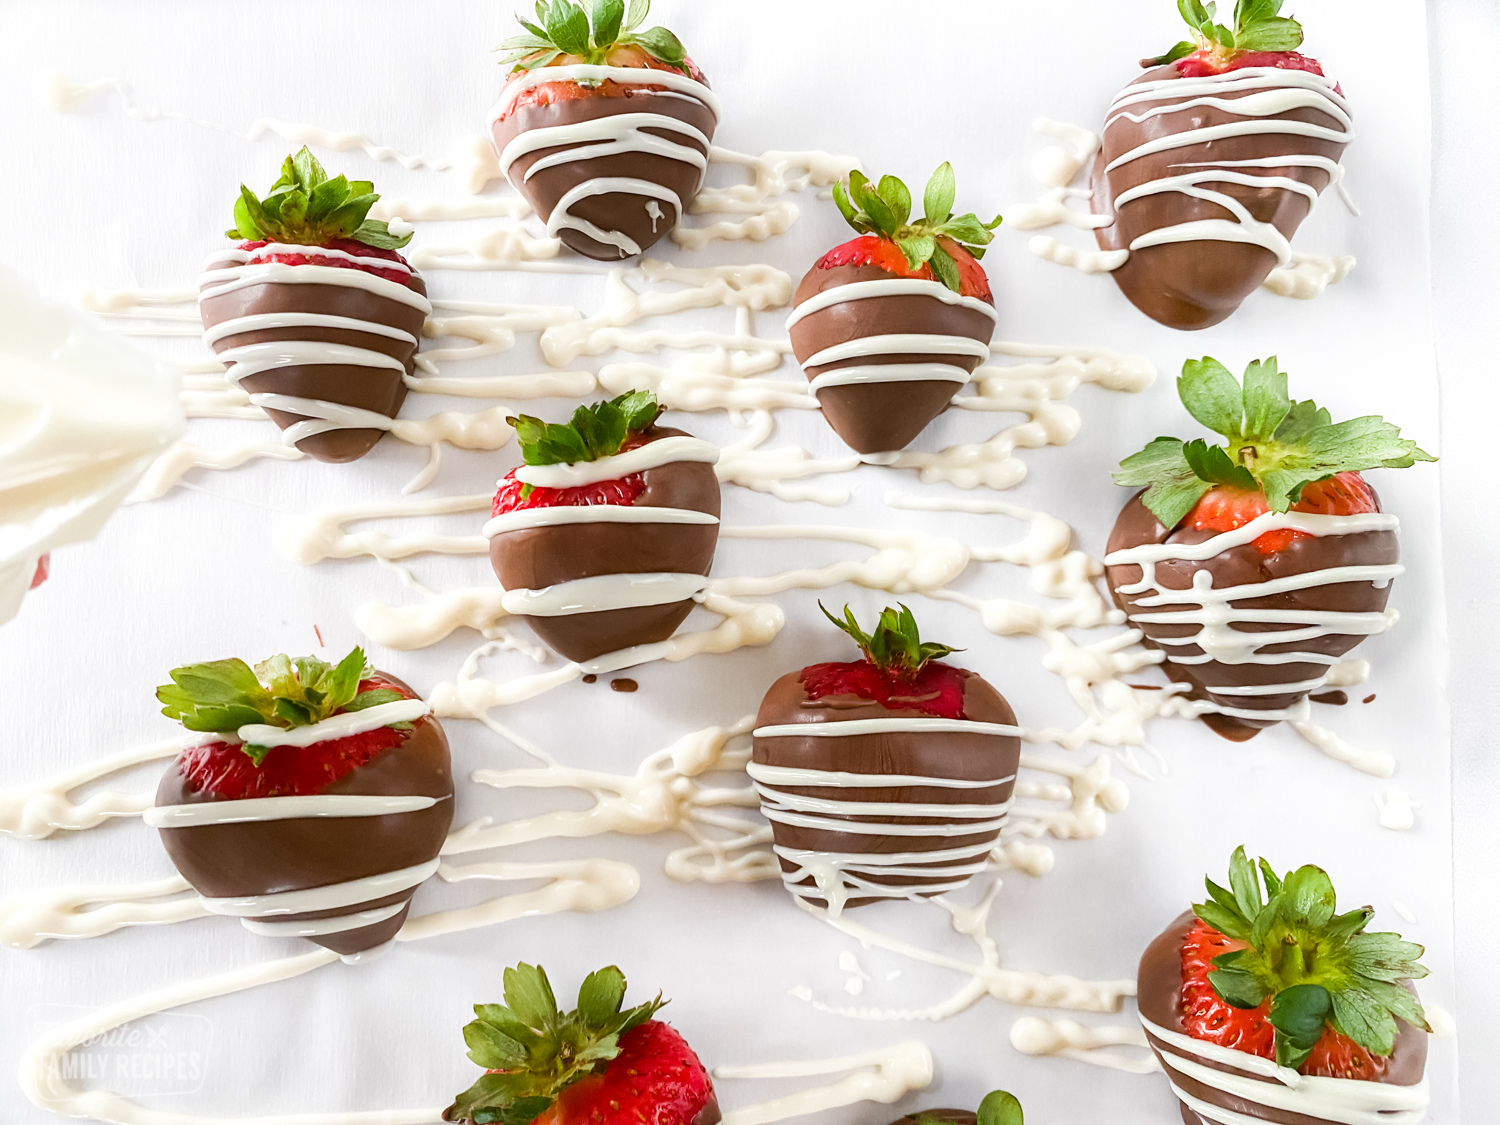 Chocolate covered strawberries on parchment paper.